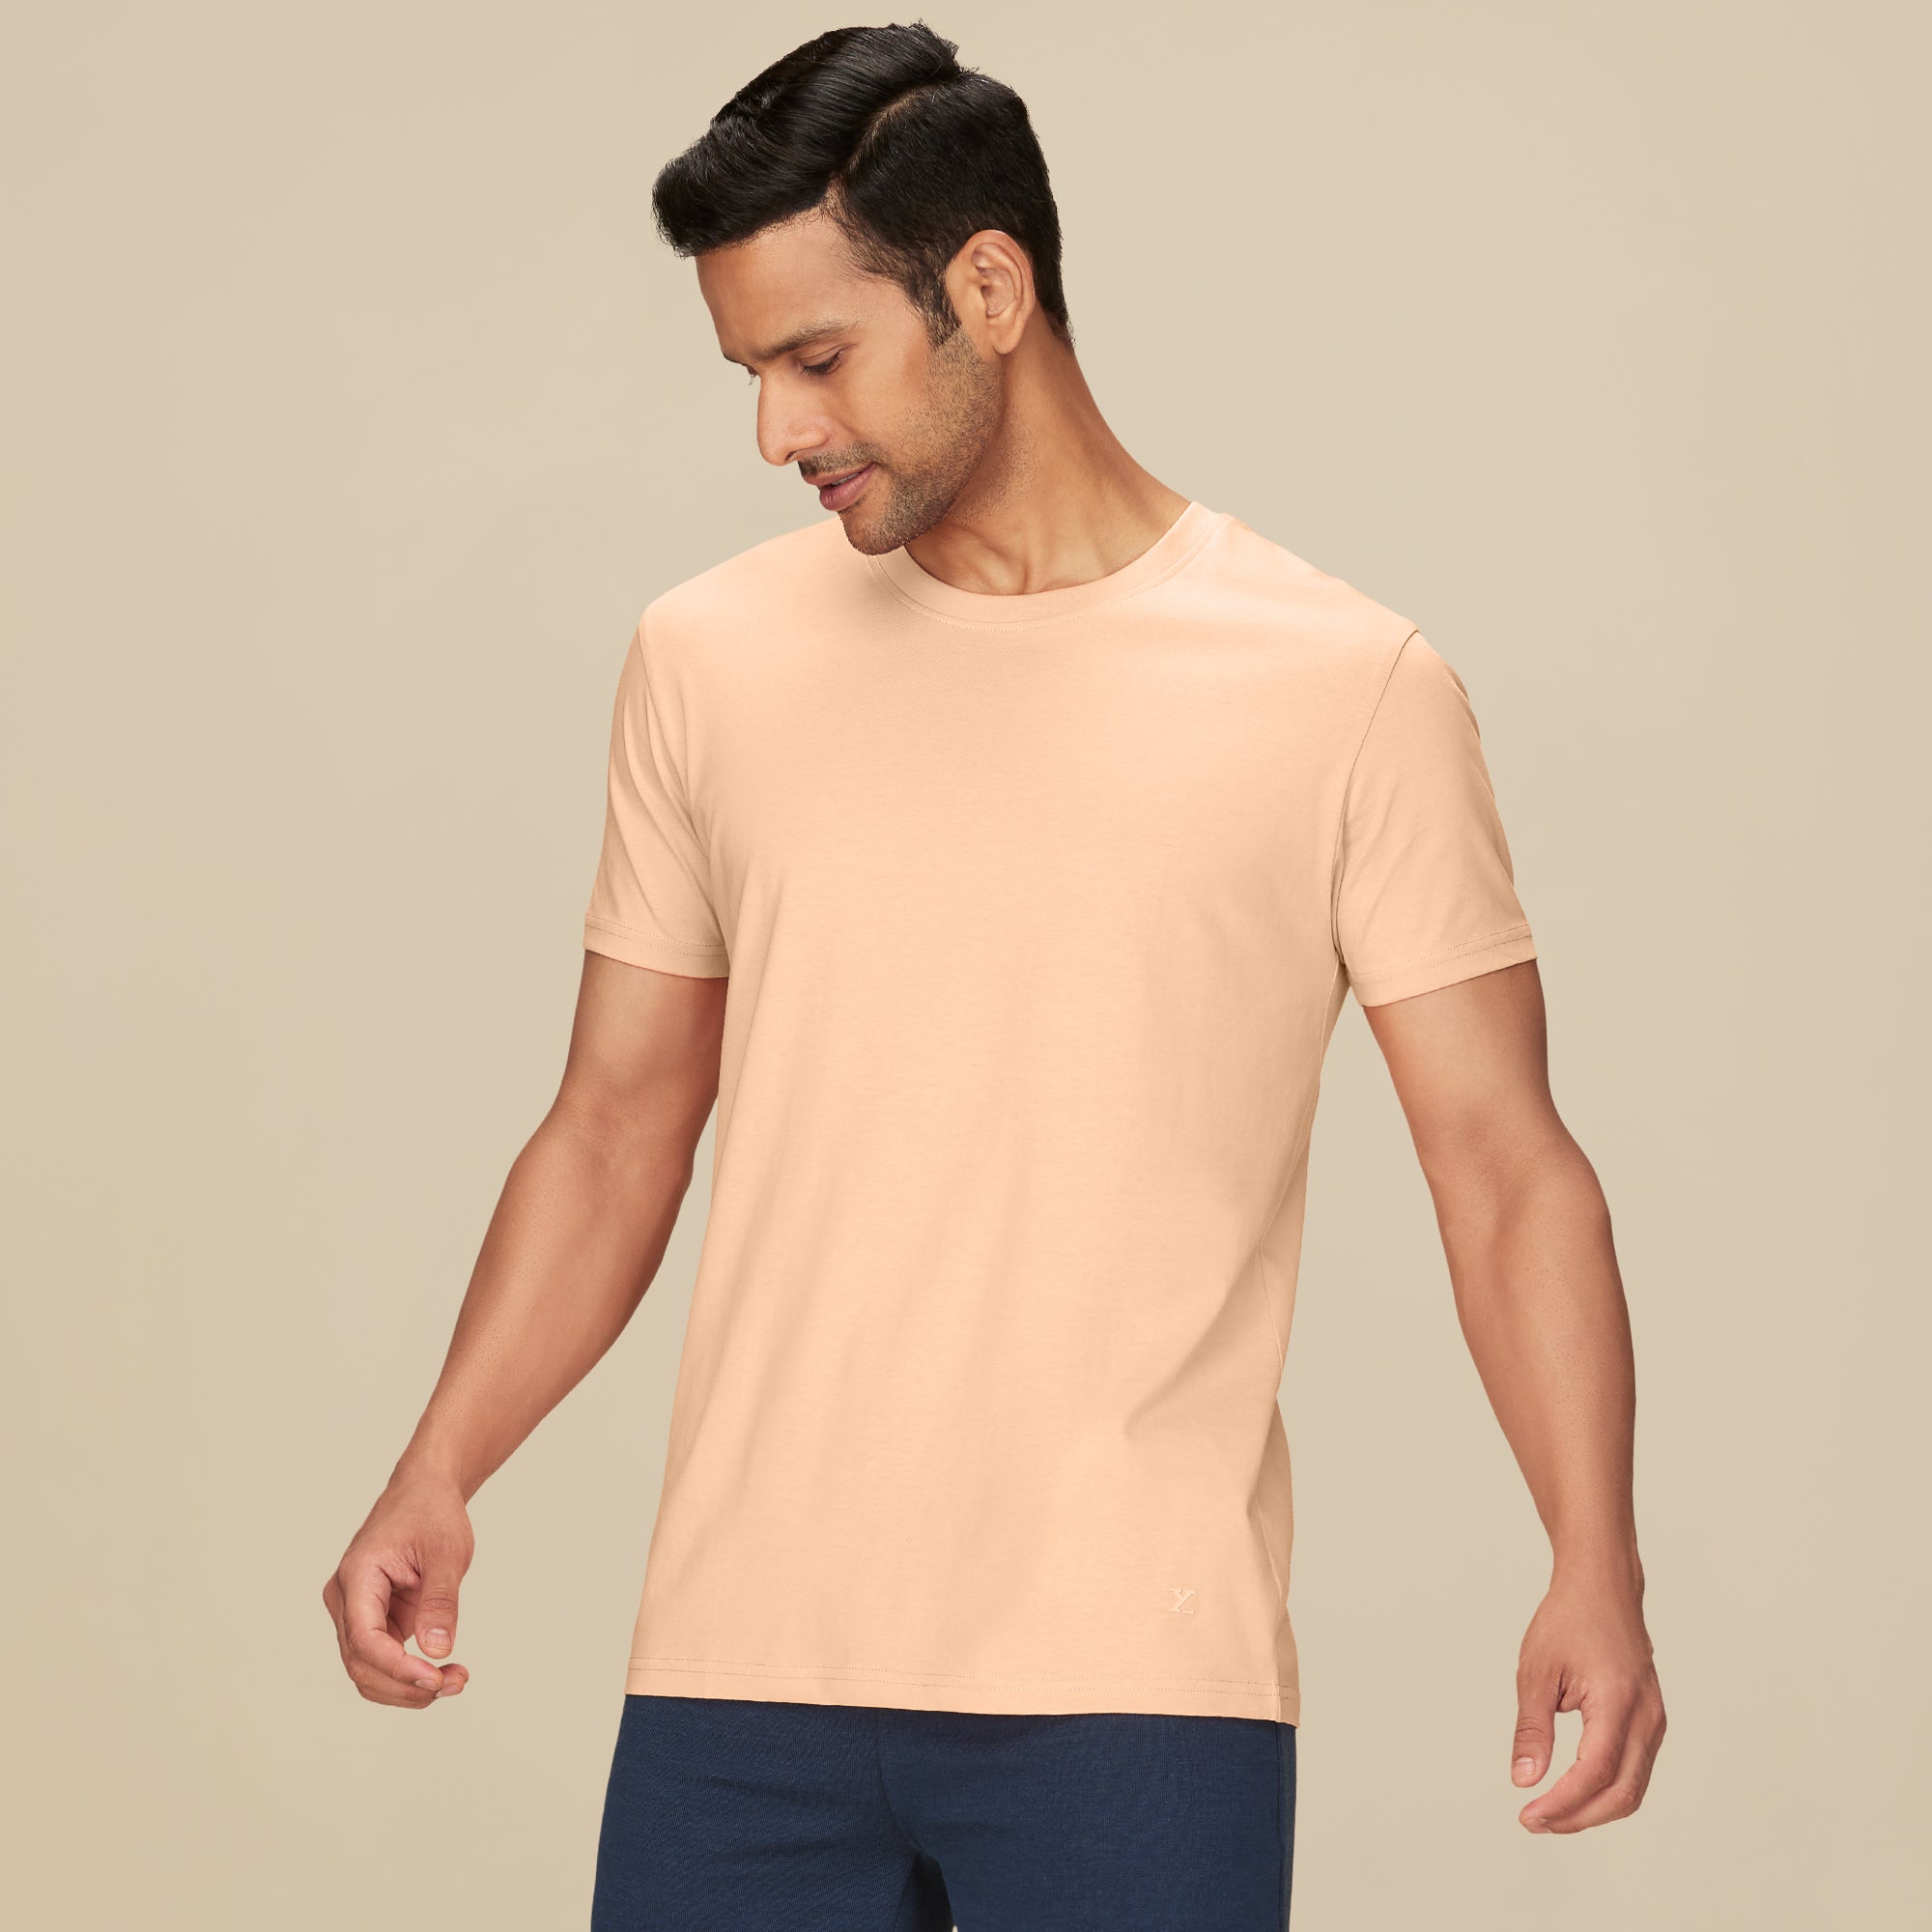 Pace Combed Cotton T-shirt for men Peach Blush - XYXX Mens Apparels